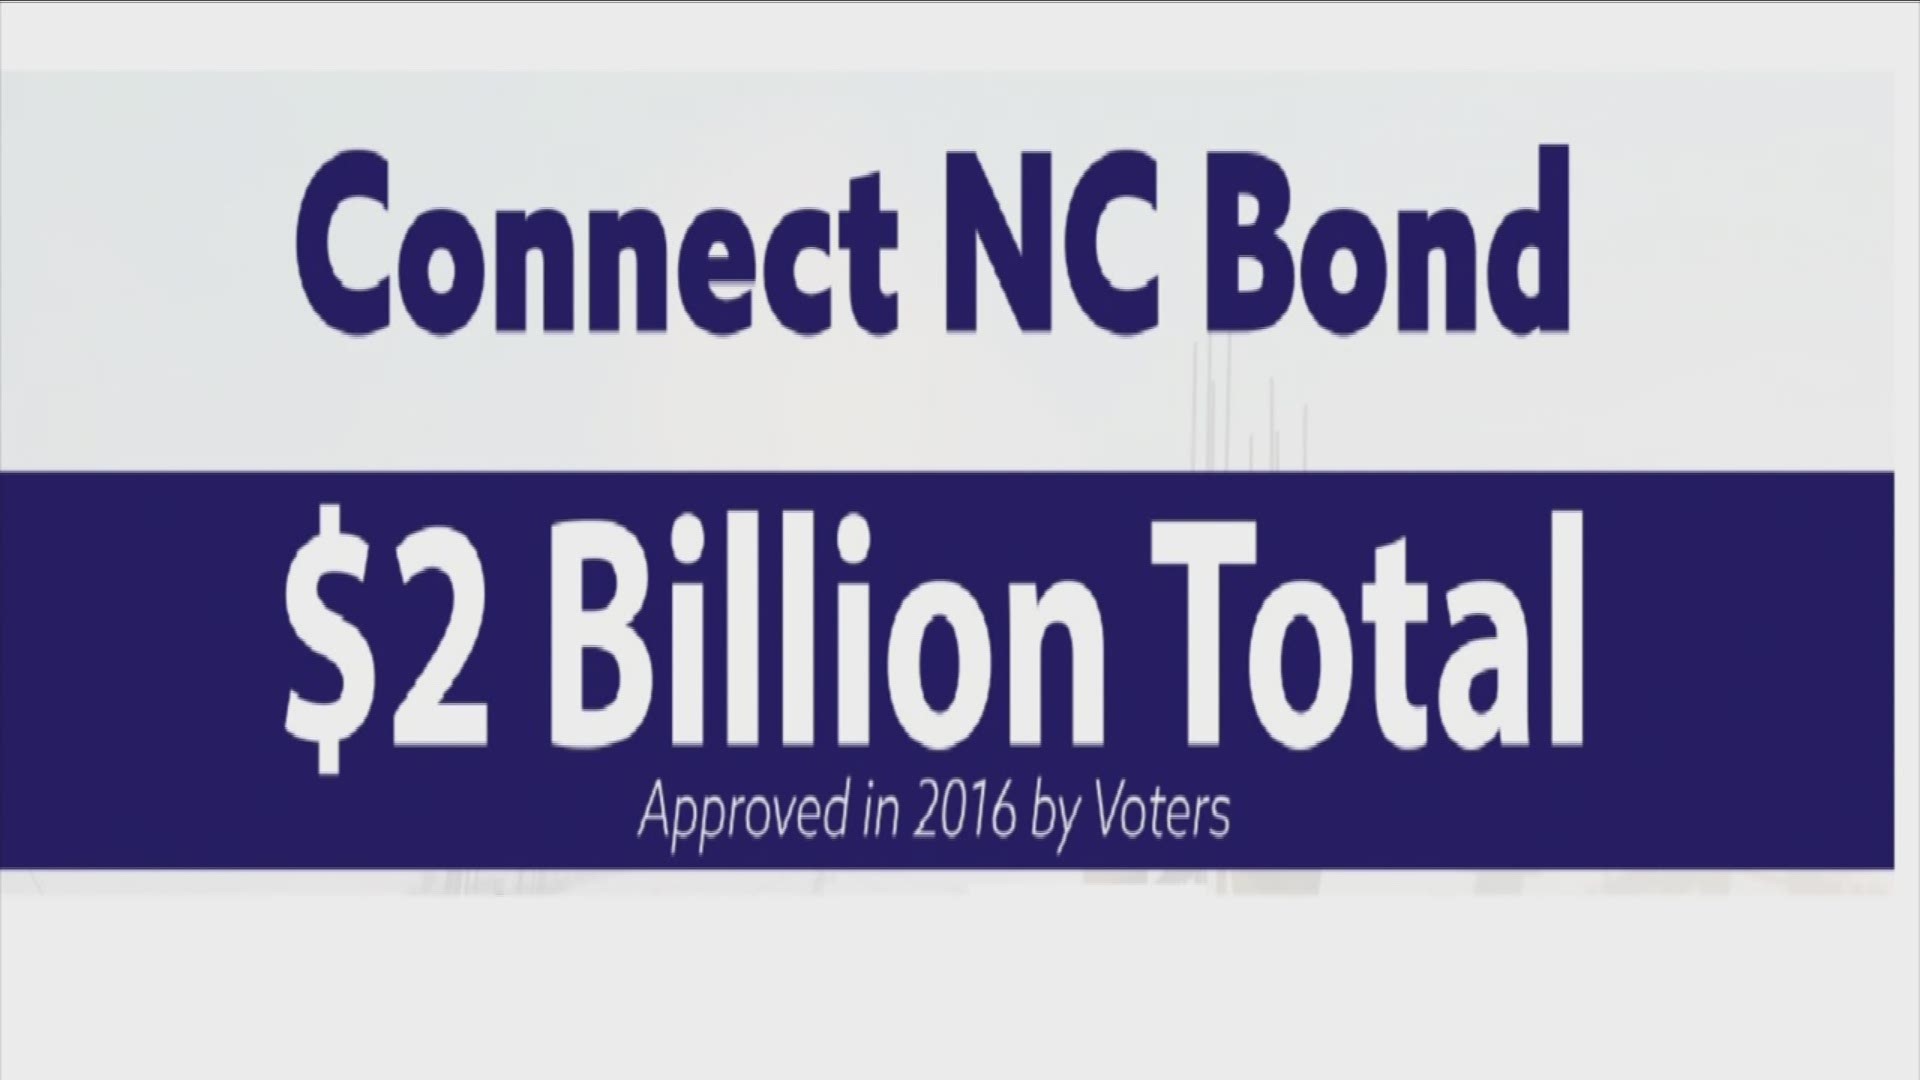 Voters approved the bonds in 2016 and just this week, $600 million was released.